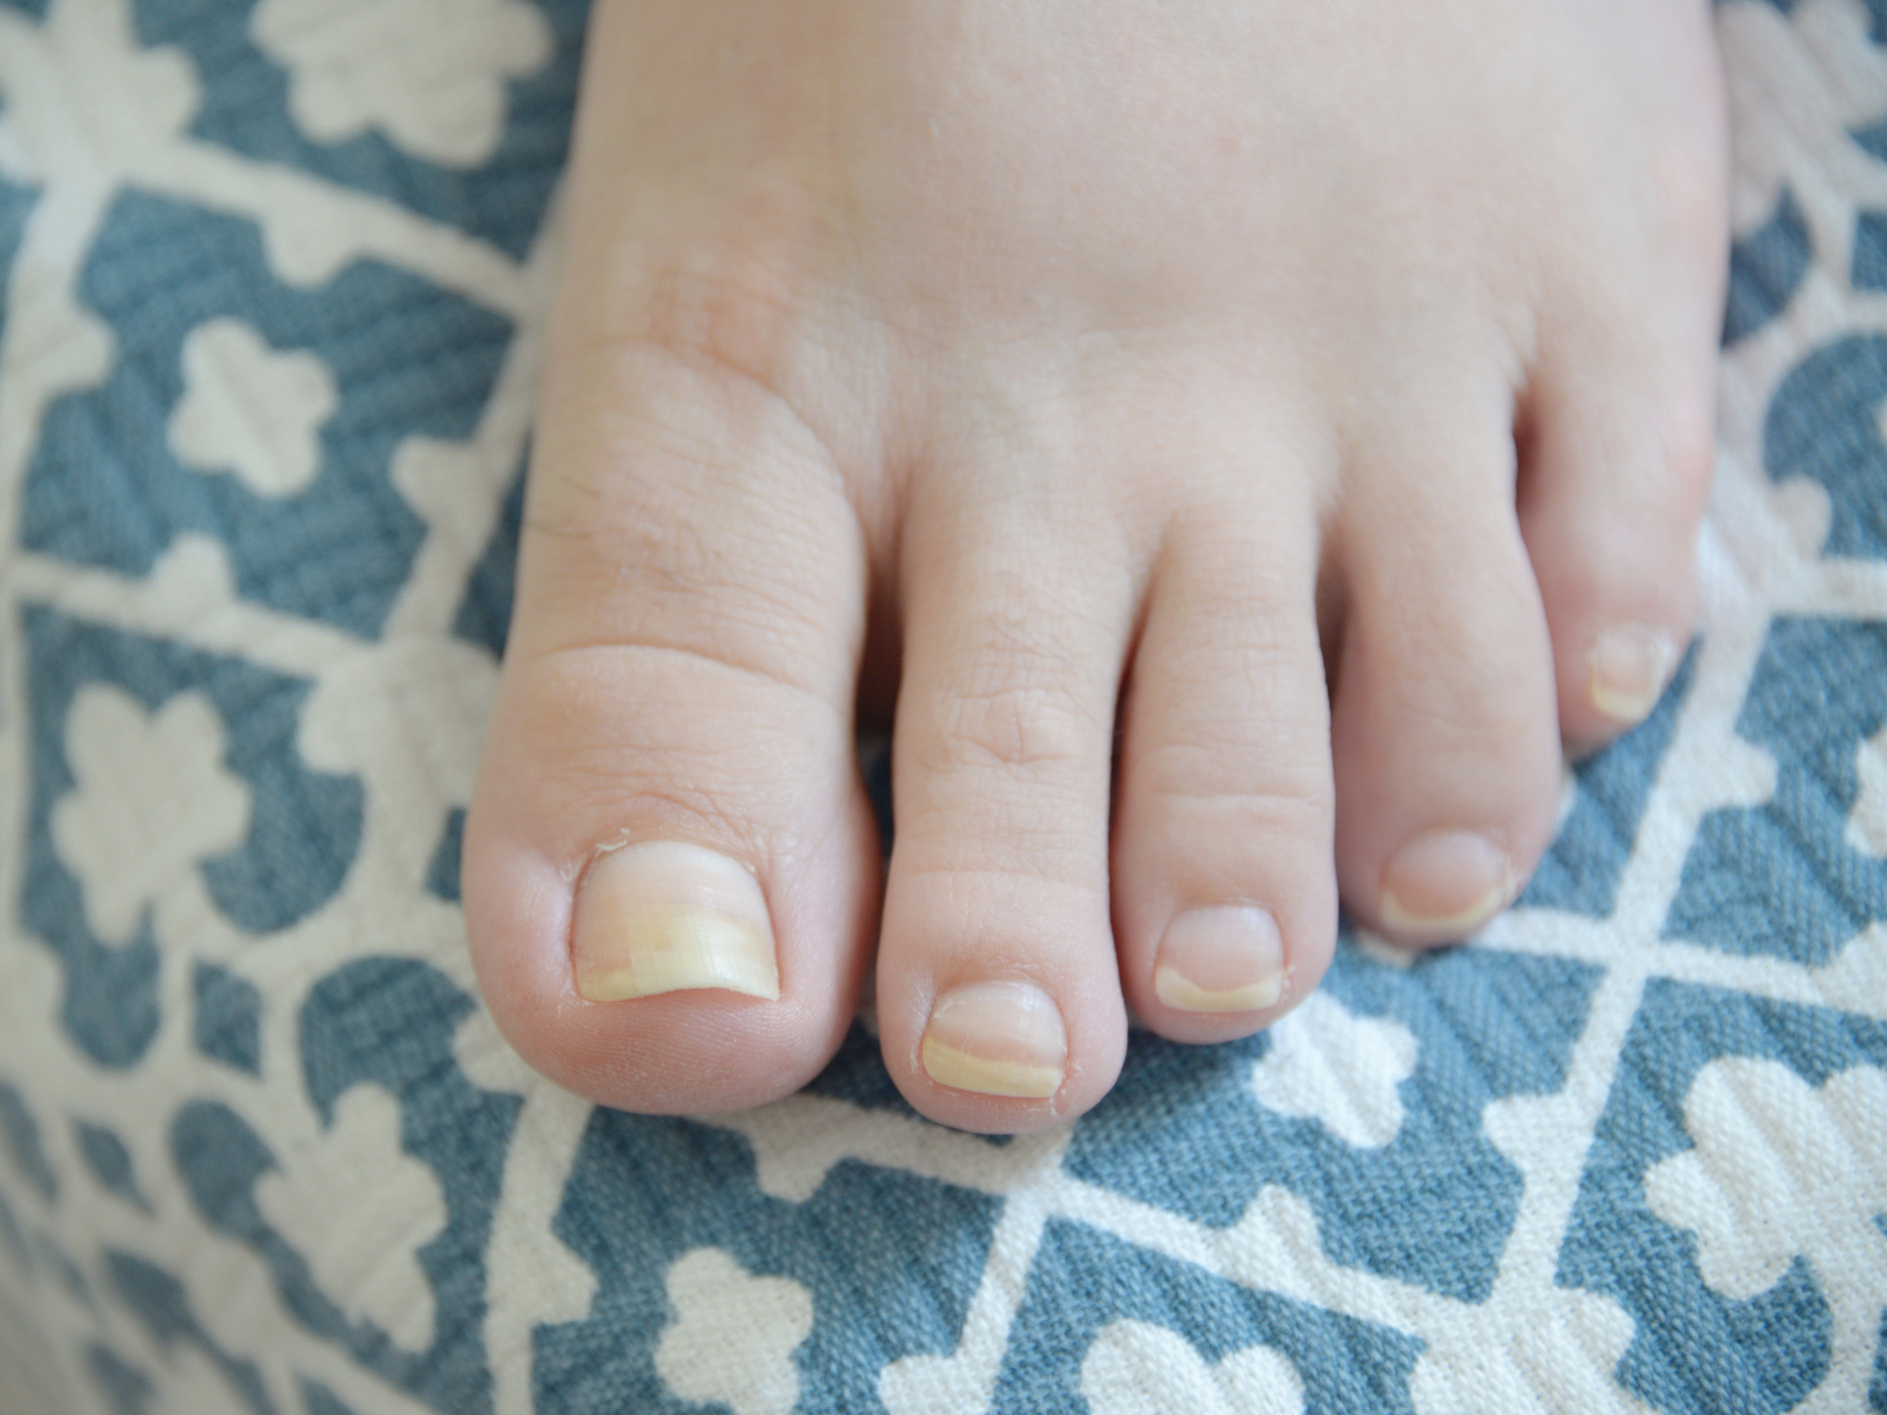 1. Causes of Big Toe Nail Color Change - wide 1